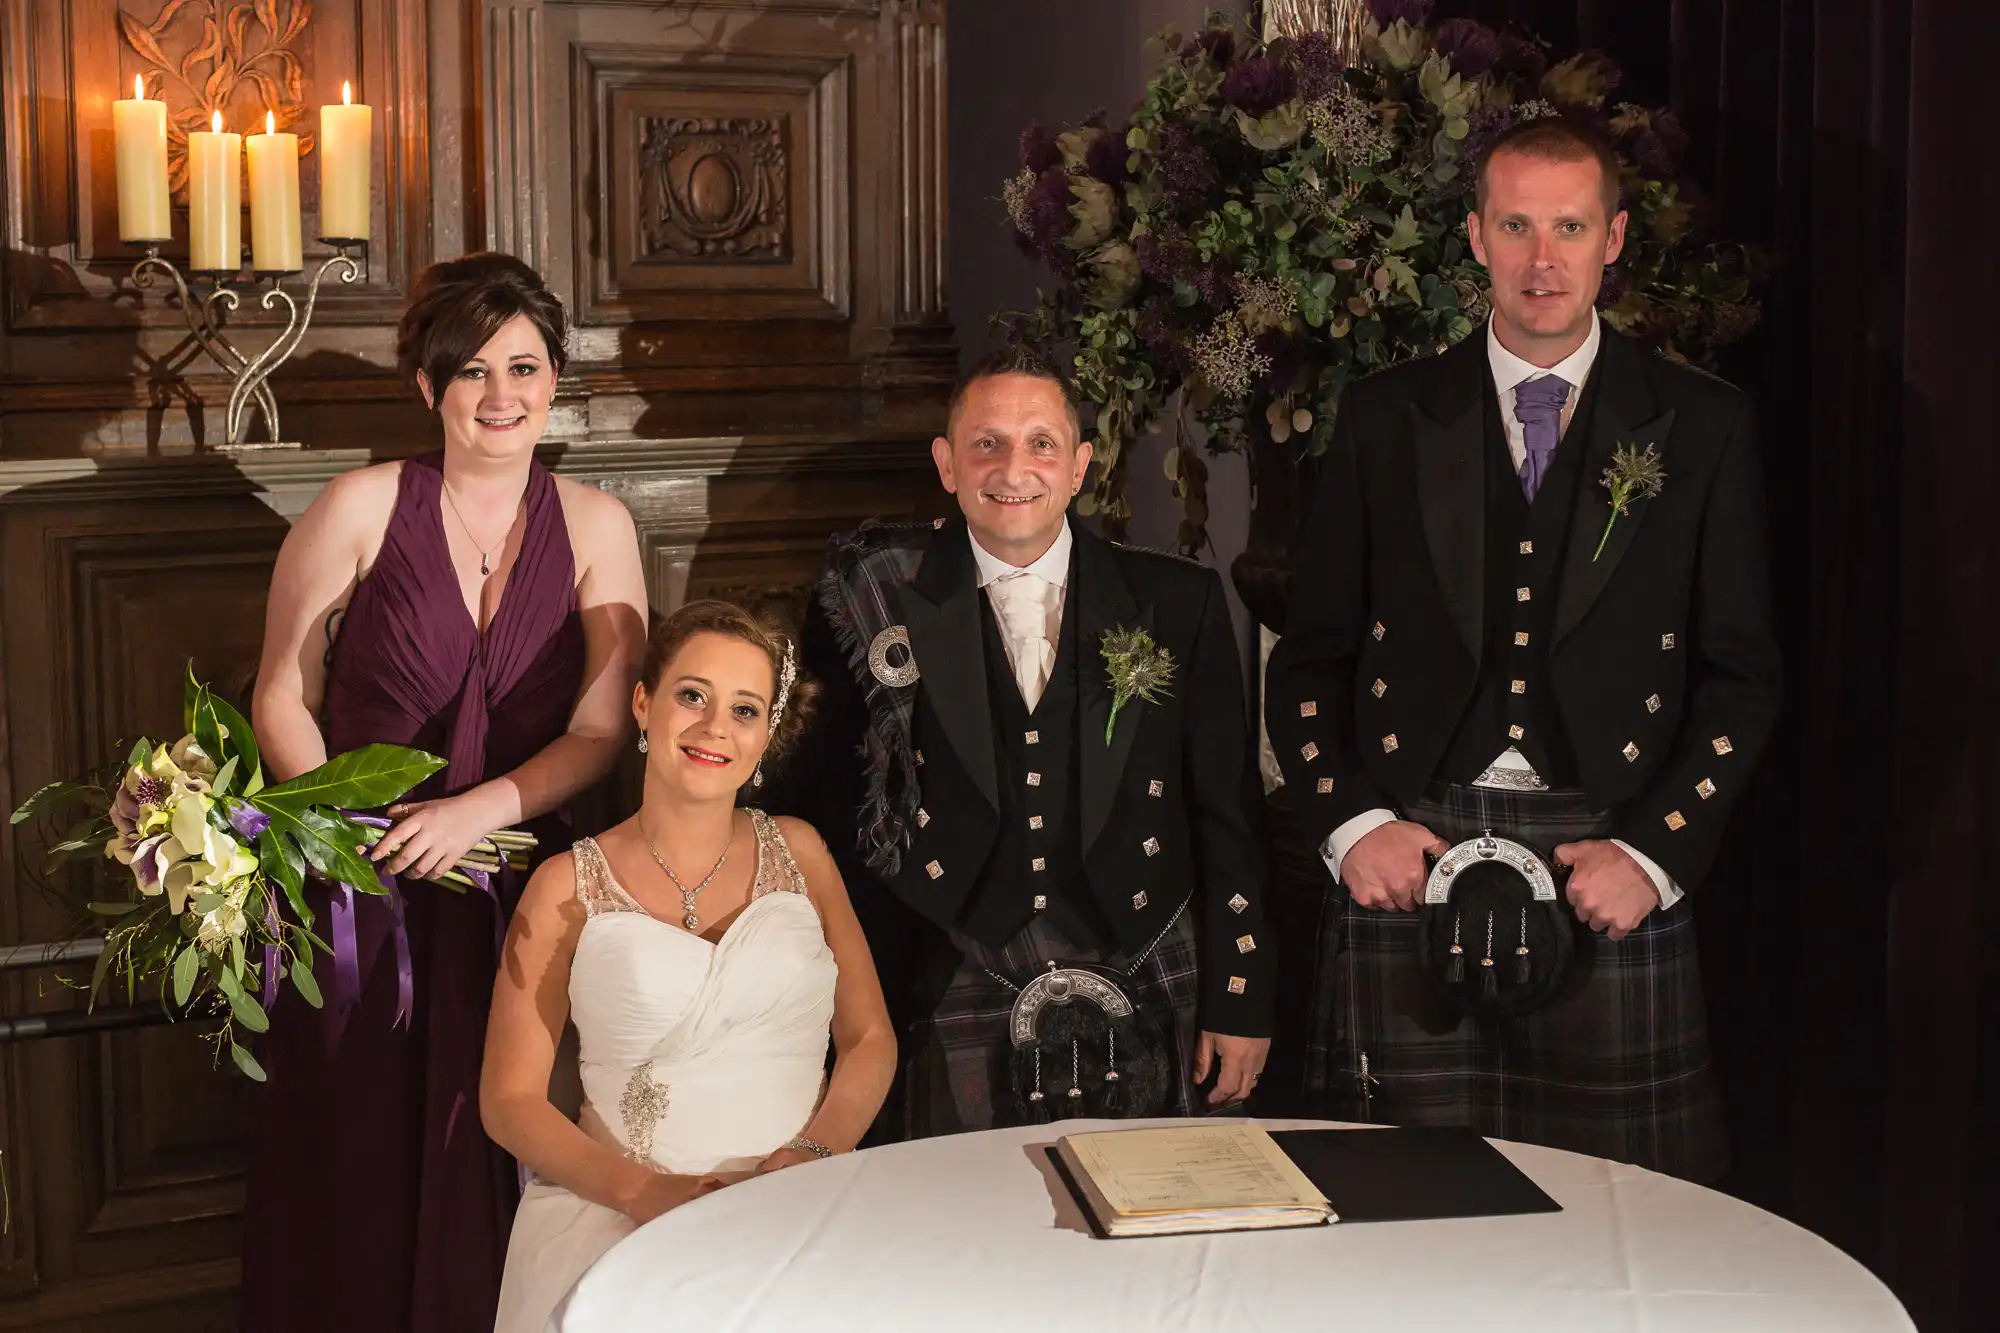 A wedding group with two men in kilts and two women, one in a bridal gown, standing by a table with a book, in a room with candles and floral decorations.